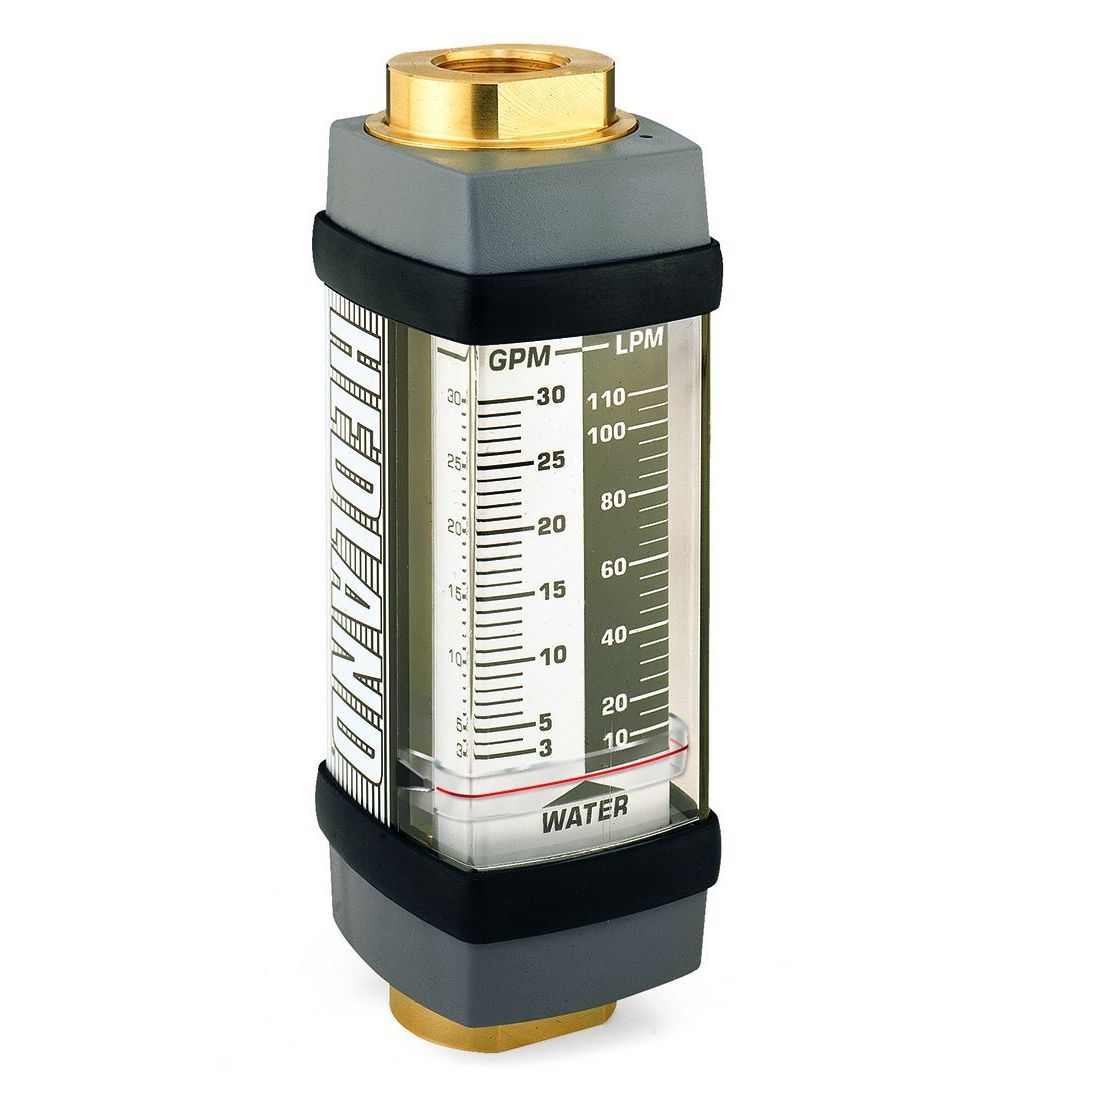 H605B-005 : Hedland 3500psi Brass Flow Meter for Water, 1/2 NPT, 0.5 to 5.0 GPM